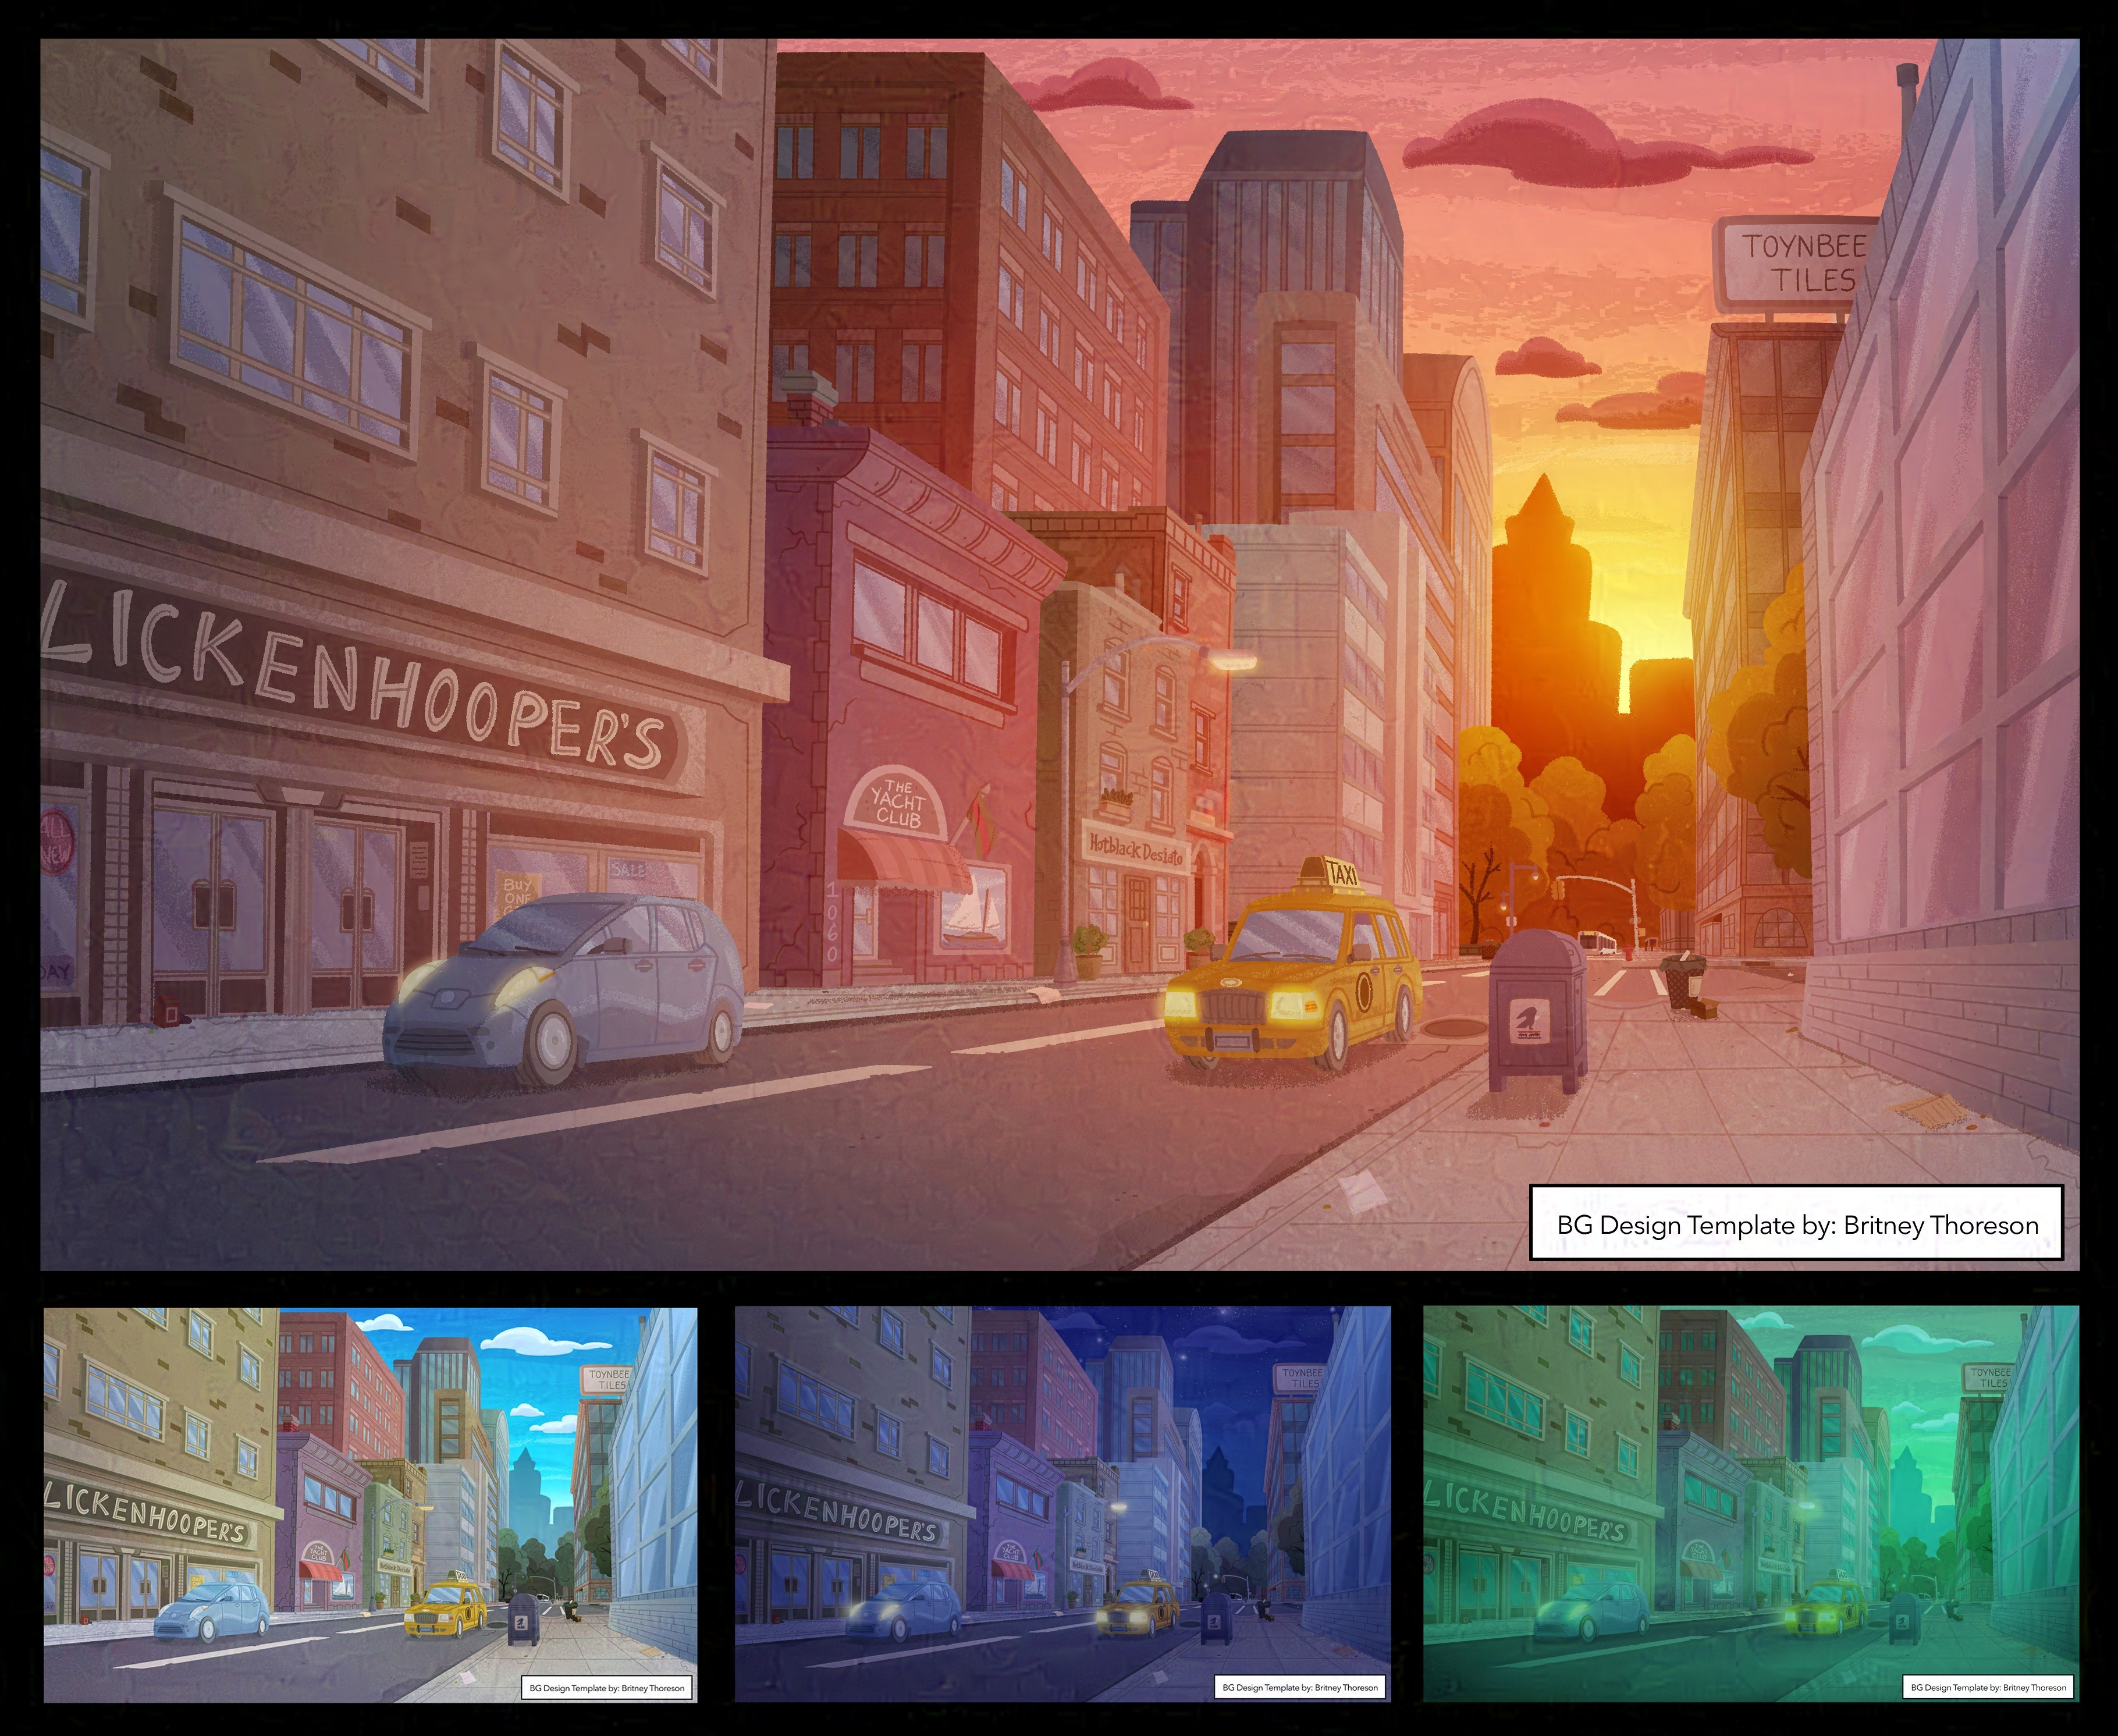 City Street at Sunset
(With color variants for daytime, night, and spooky lighting)